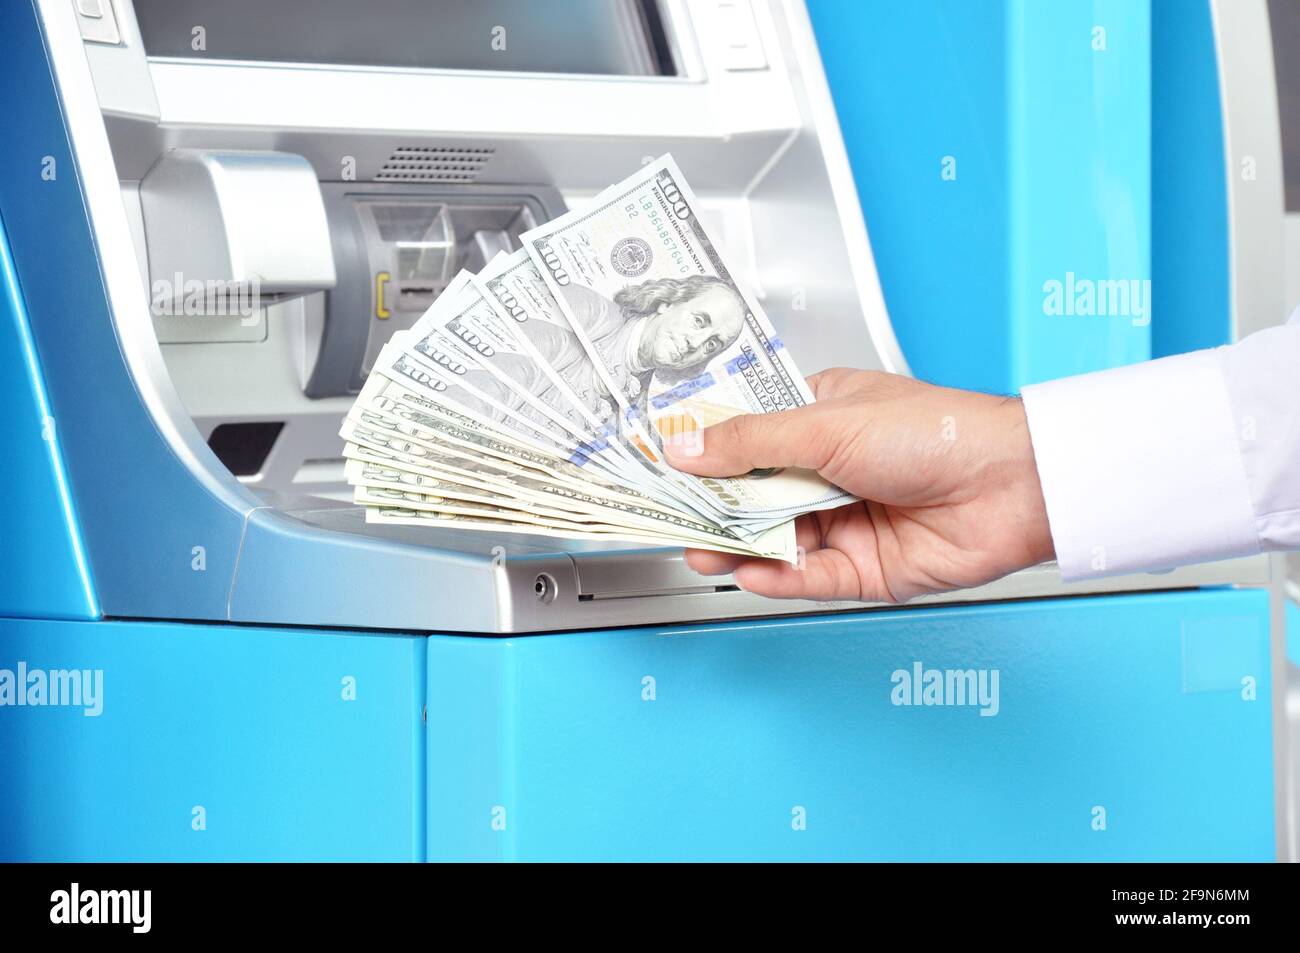 Money - hand holding US dollar banknotes in front of ATM Stock Photo